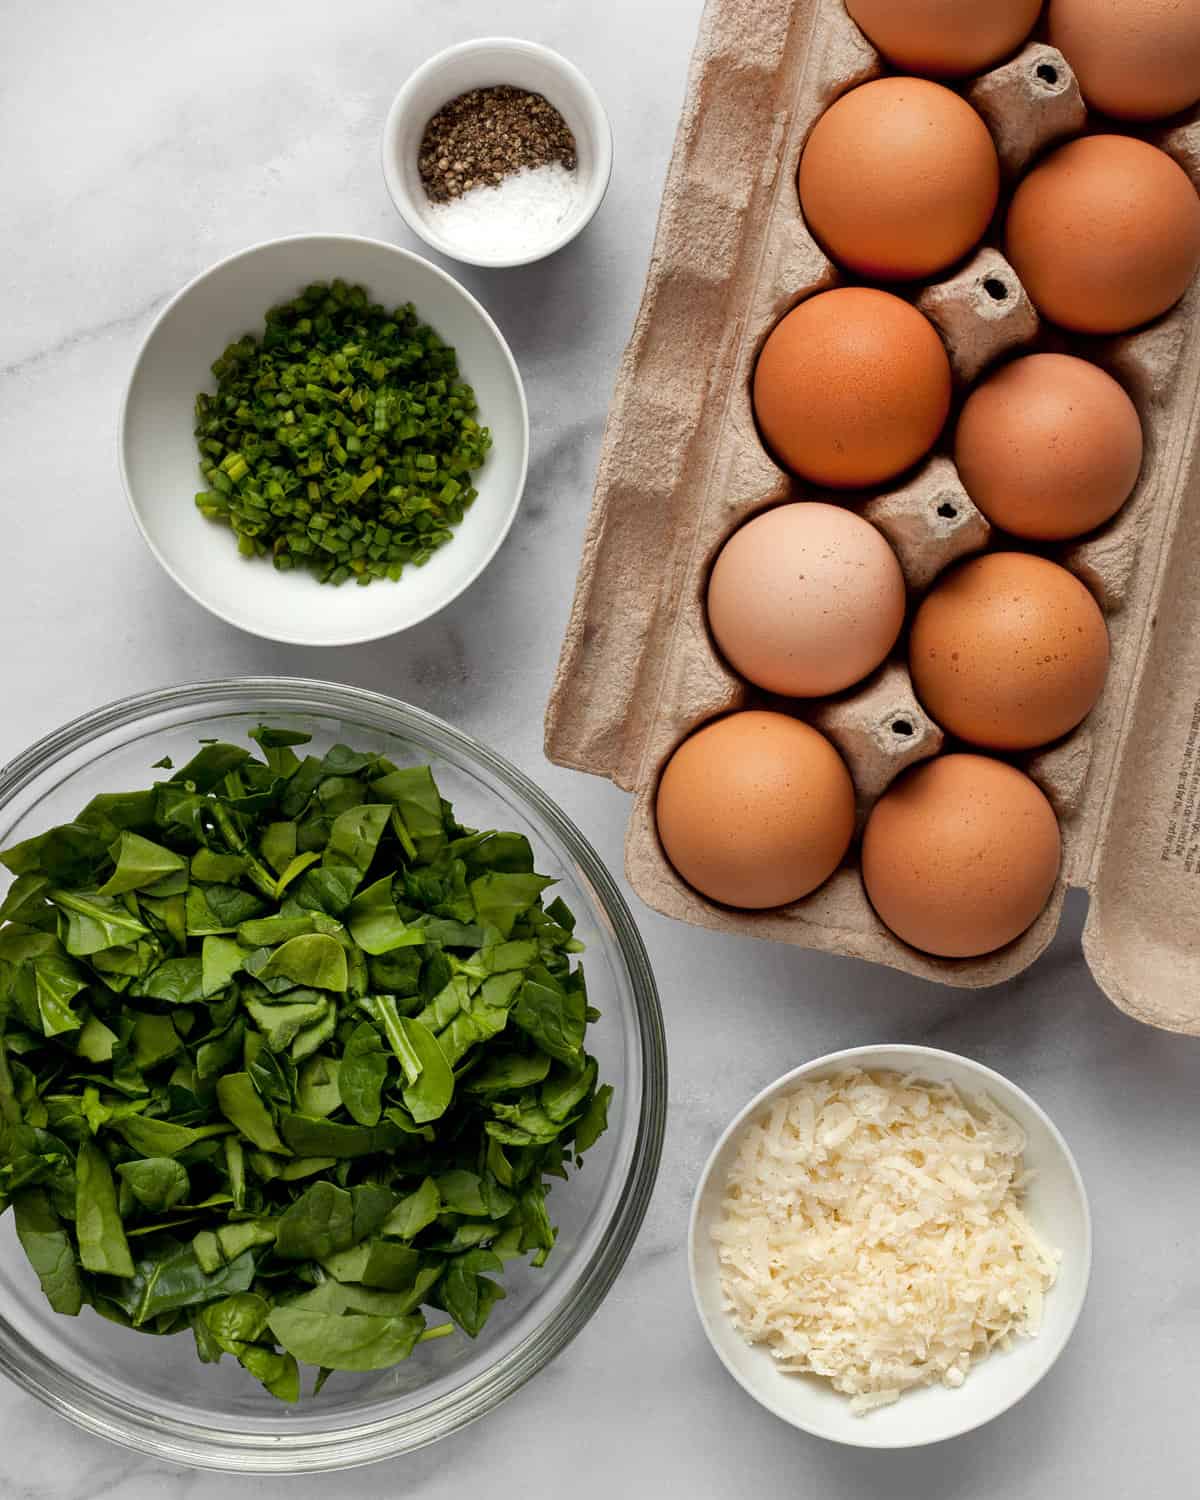 Ingredients for frittatas including eggs, spinach, parmesan, chives, salt and pepper.